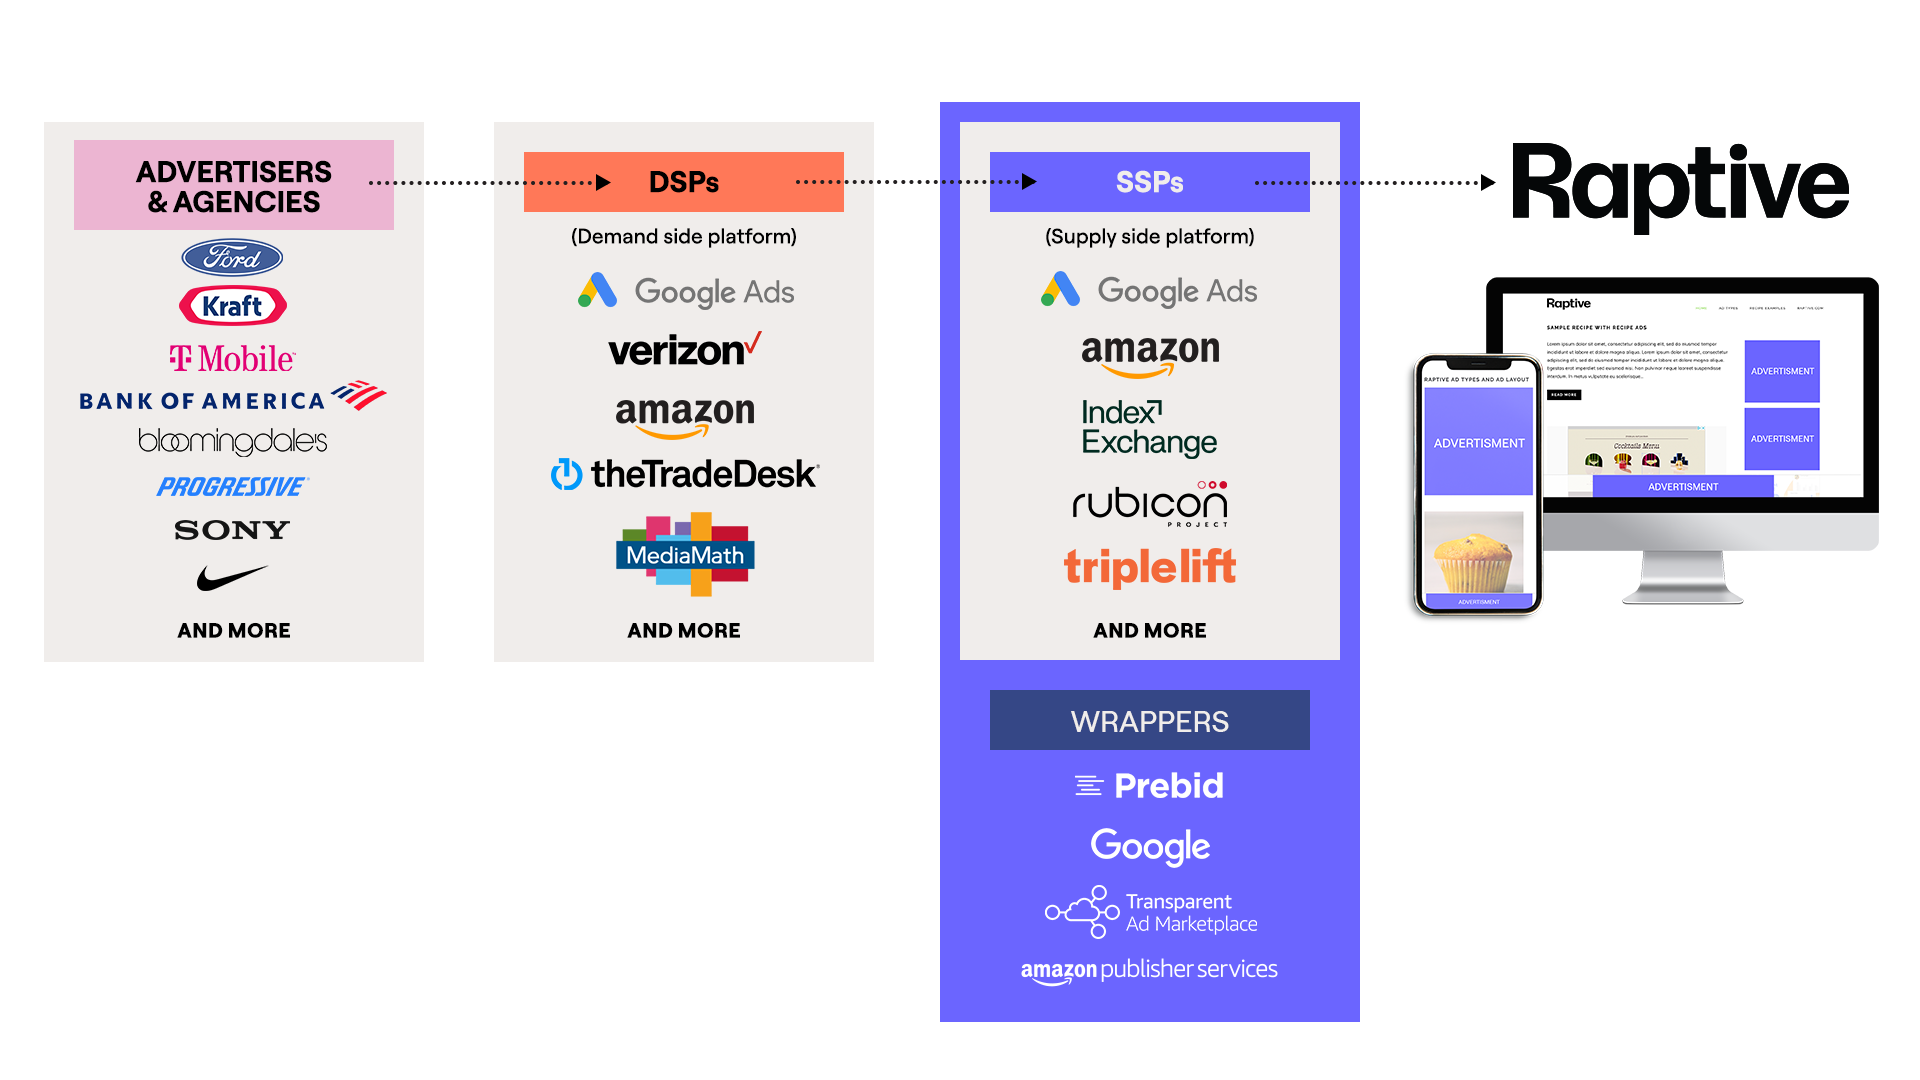 Chart shows how advertisers and agencies like Ford, Kraft, and others send ads to DSPs like Google Ads or Amazon, which send ads to SSPs like Index Exchange or Rubicon, which send ads to a website via Raptive.